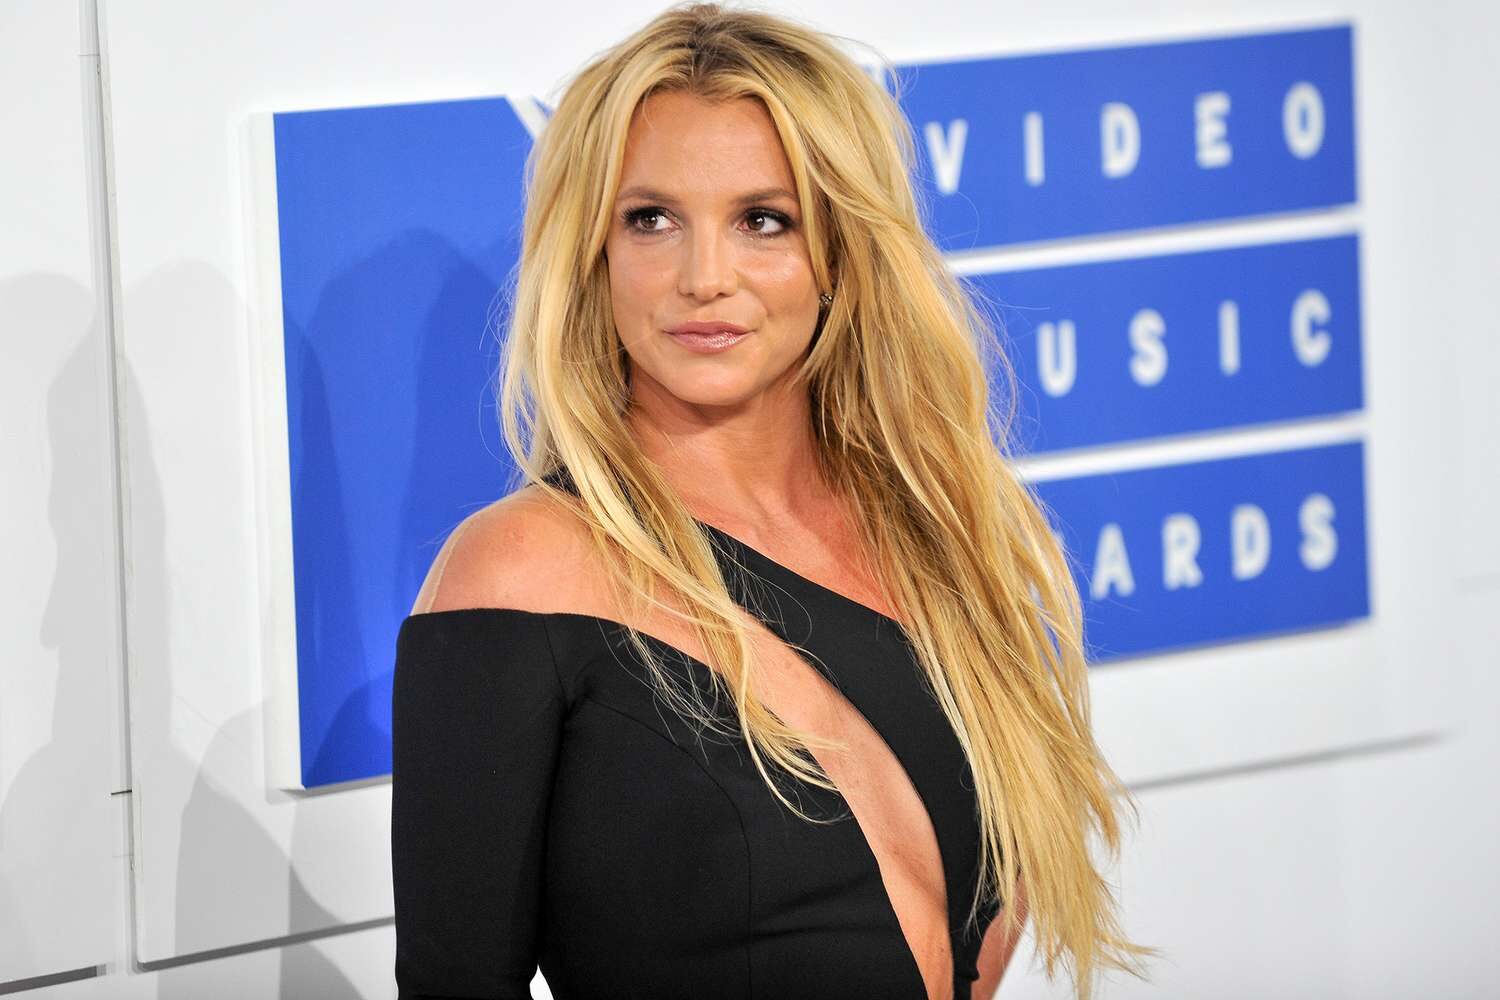 Photo of Britney Spears in black at an award show's carpet.